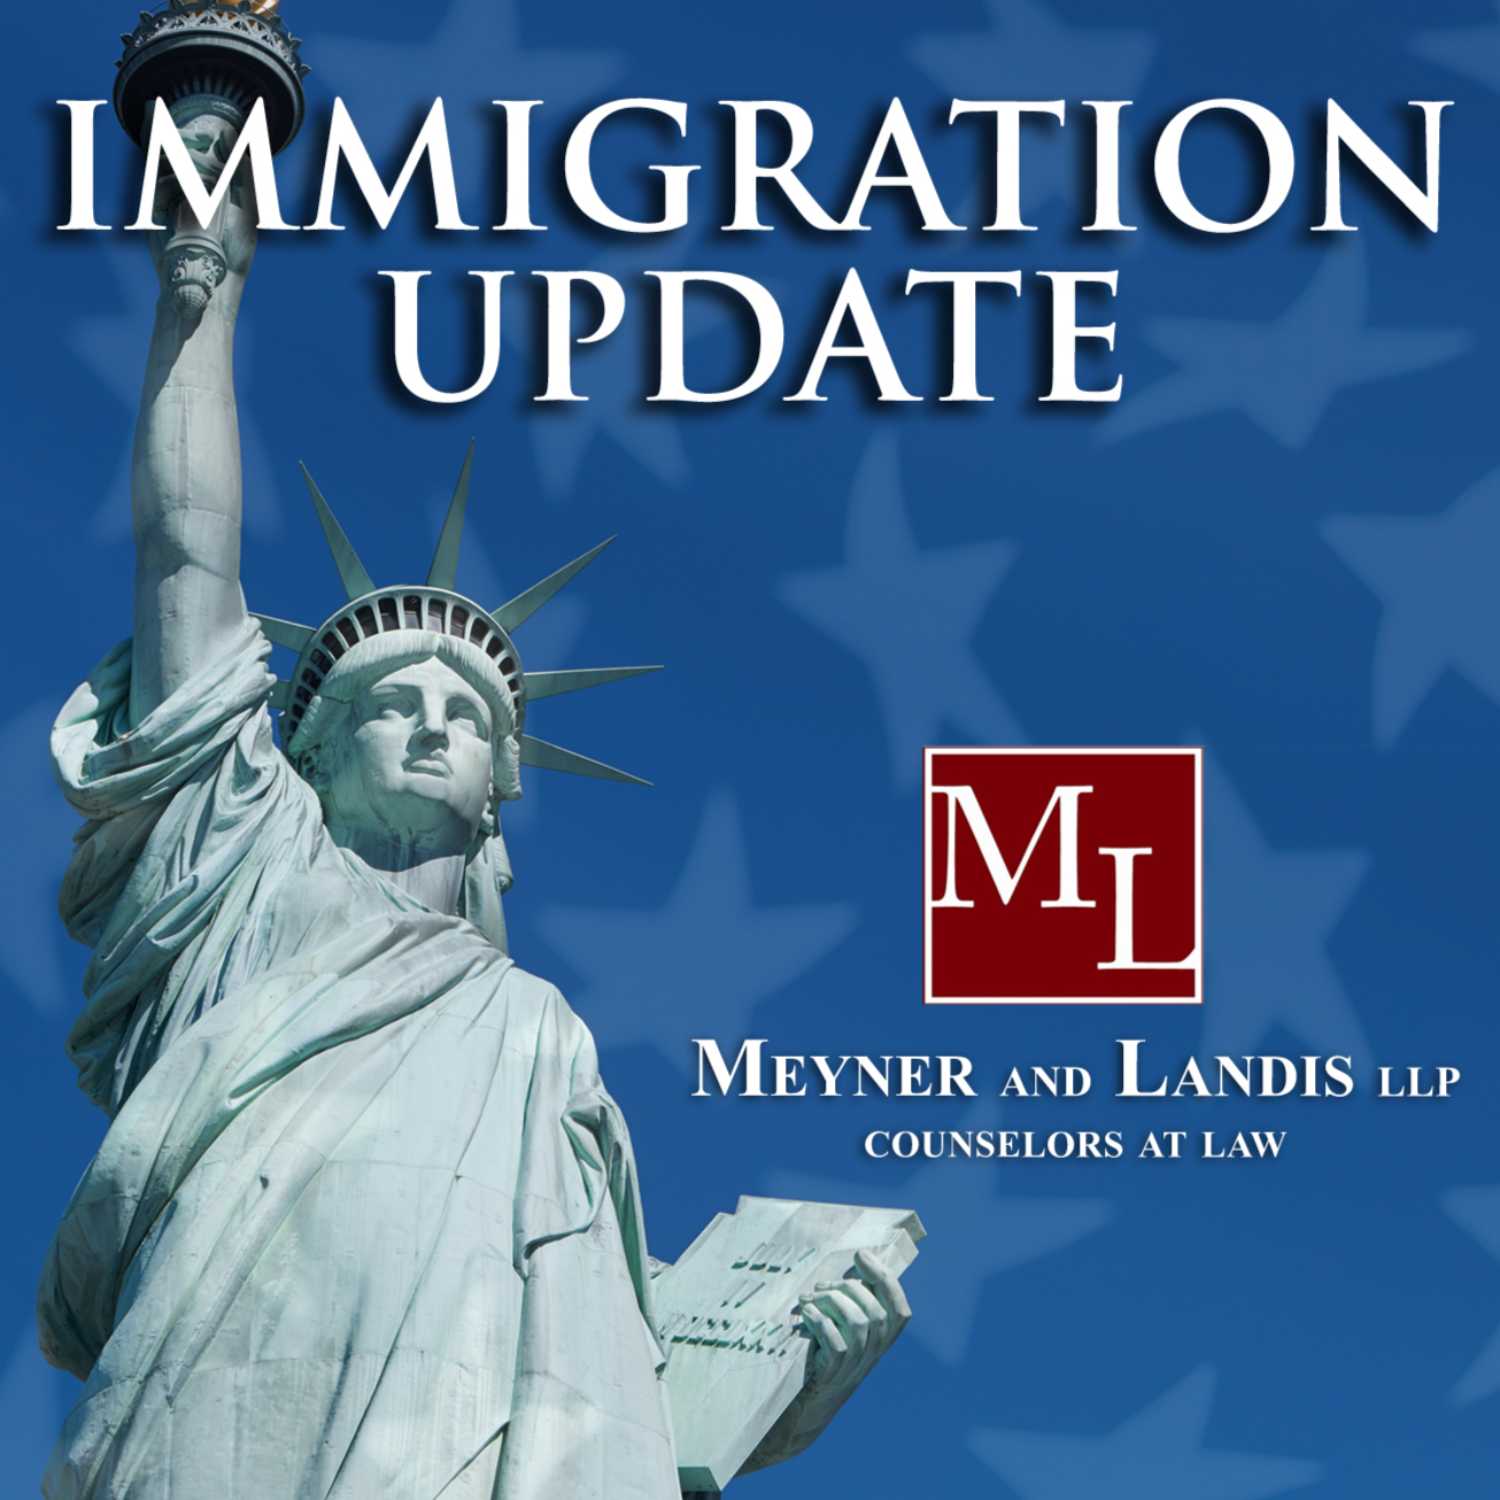 January 4, 2021: USCIS Will Not Be Increasing Fees